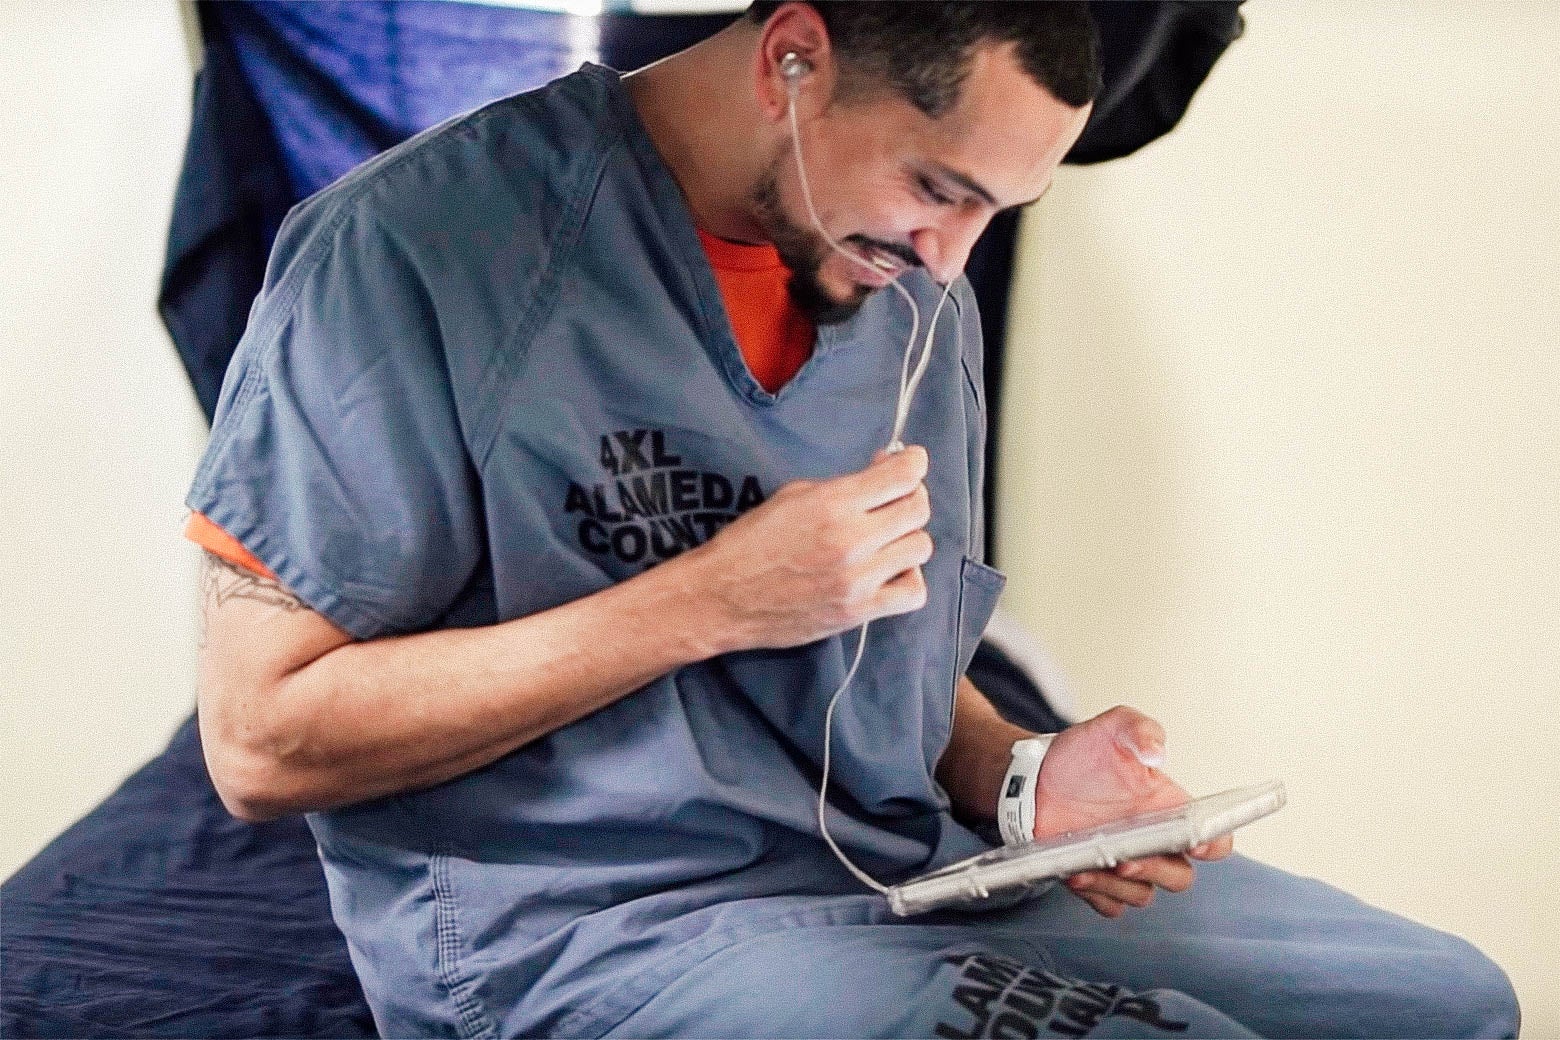 An inmate sits on a cot, smiling as he uses a GTL tablet with earbuds.